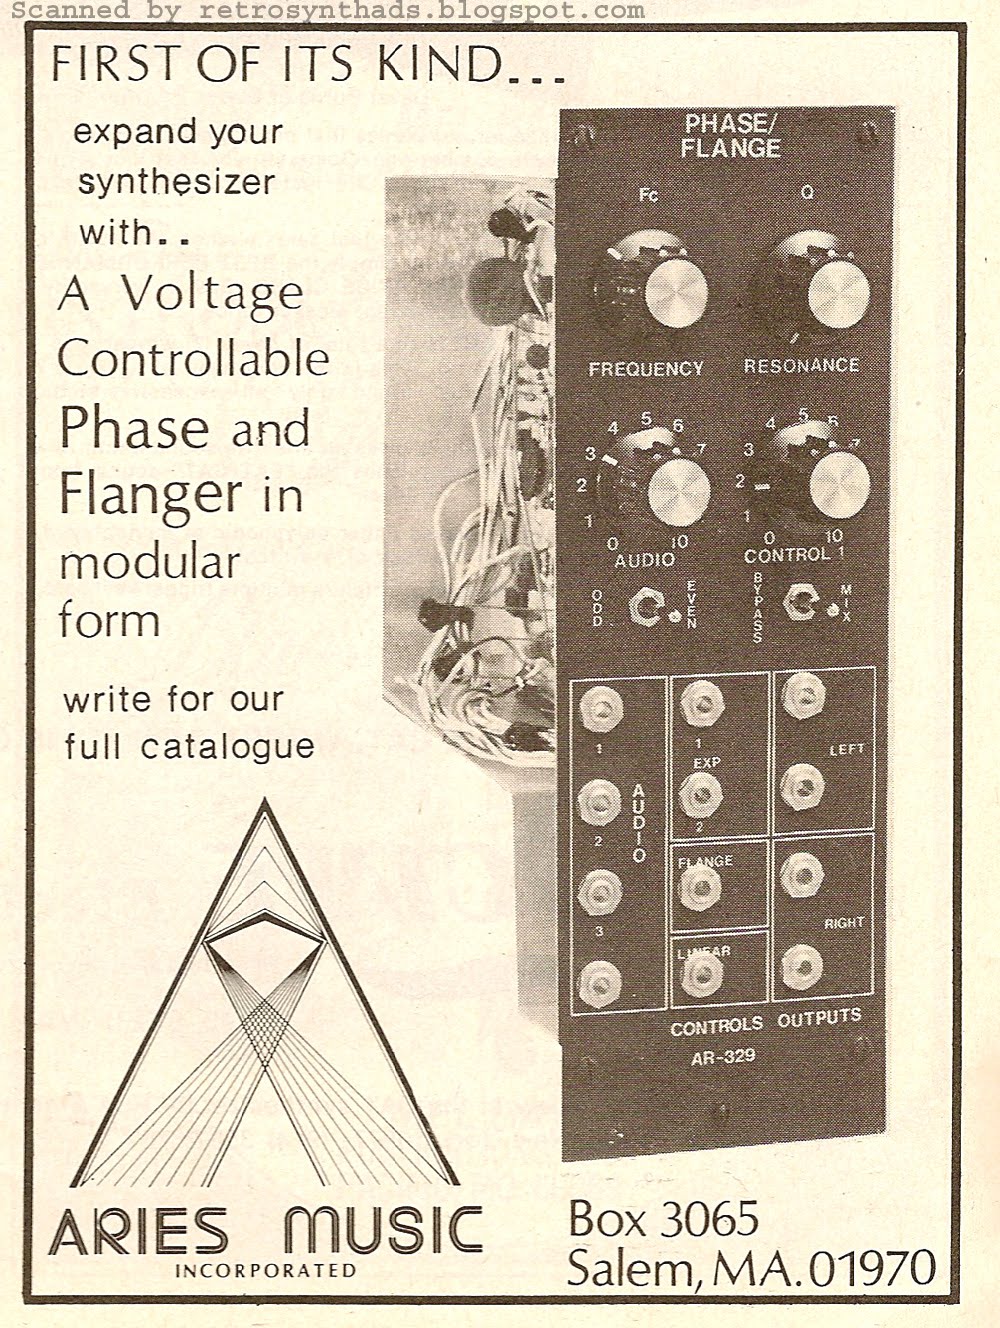 http://retrosynthads.blogspot.ca/2010/07/aries-ar-329-voltage-controlled.html